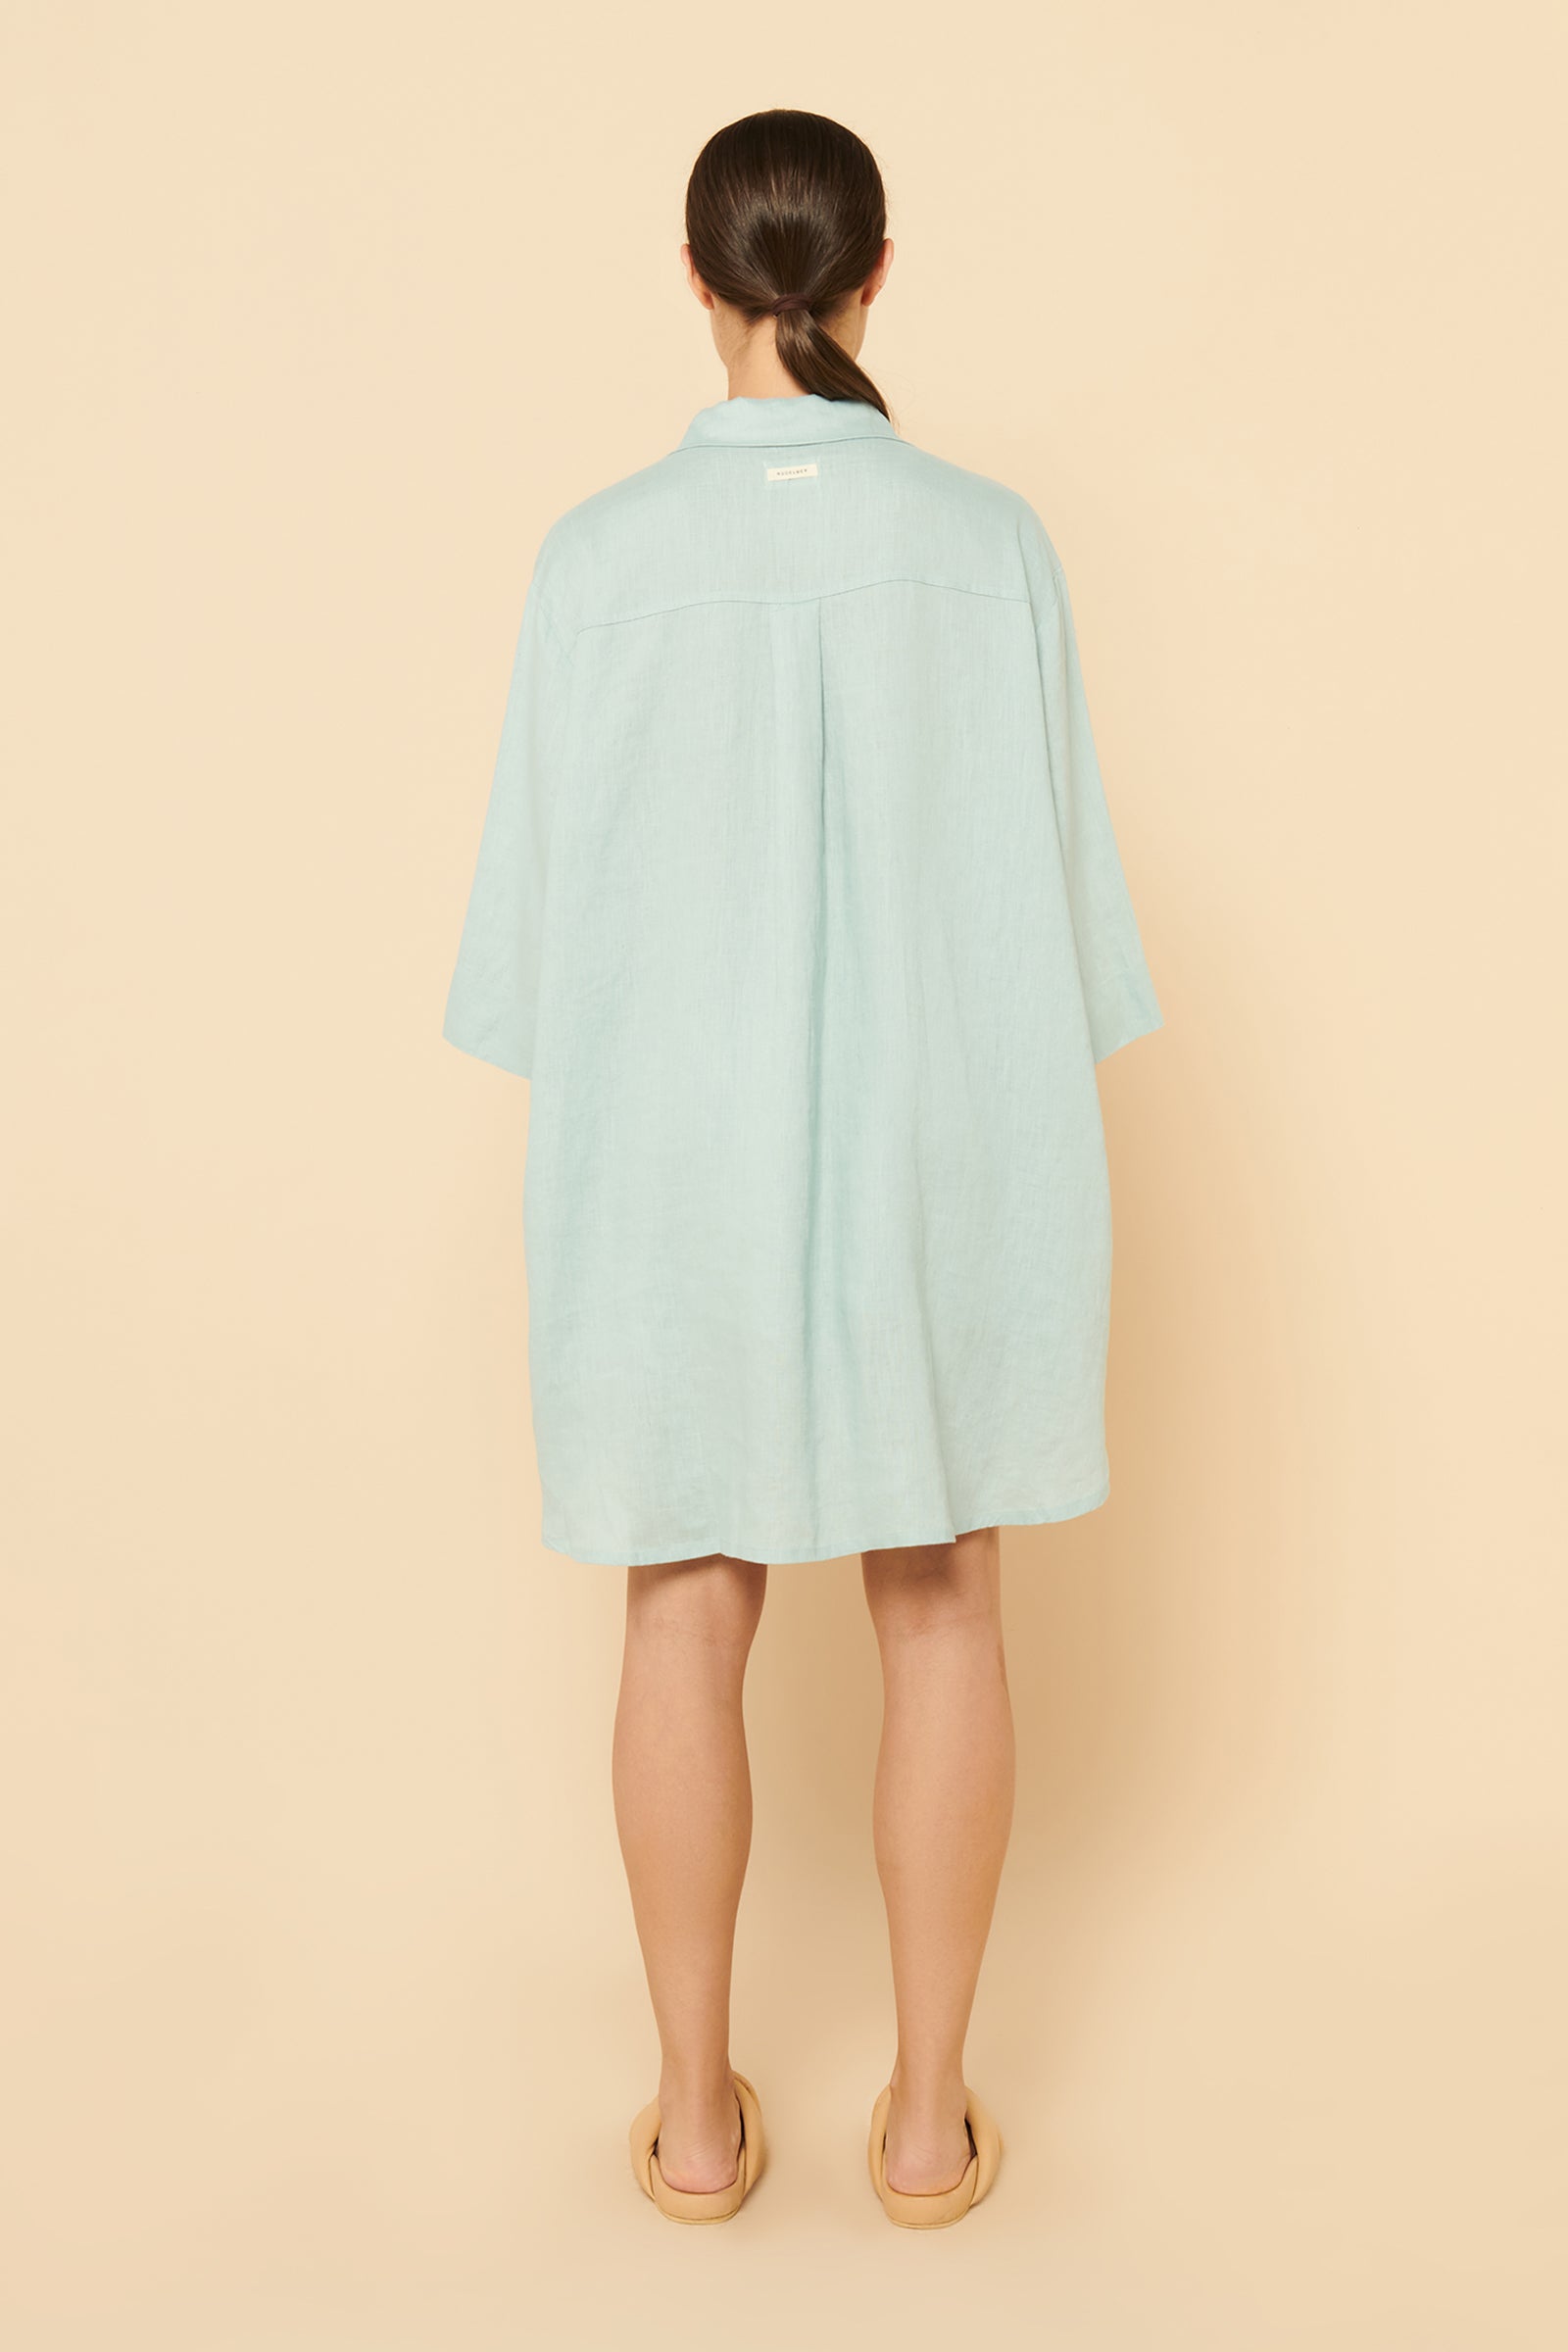 Nude Lucy Lounge Linen Longline Shirt In A Blue Lagoon Colour 